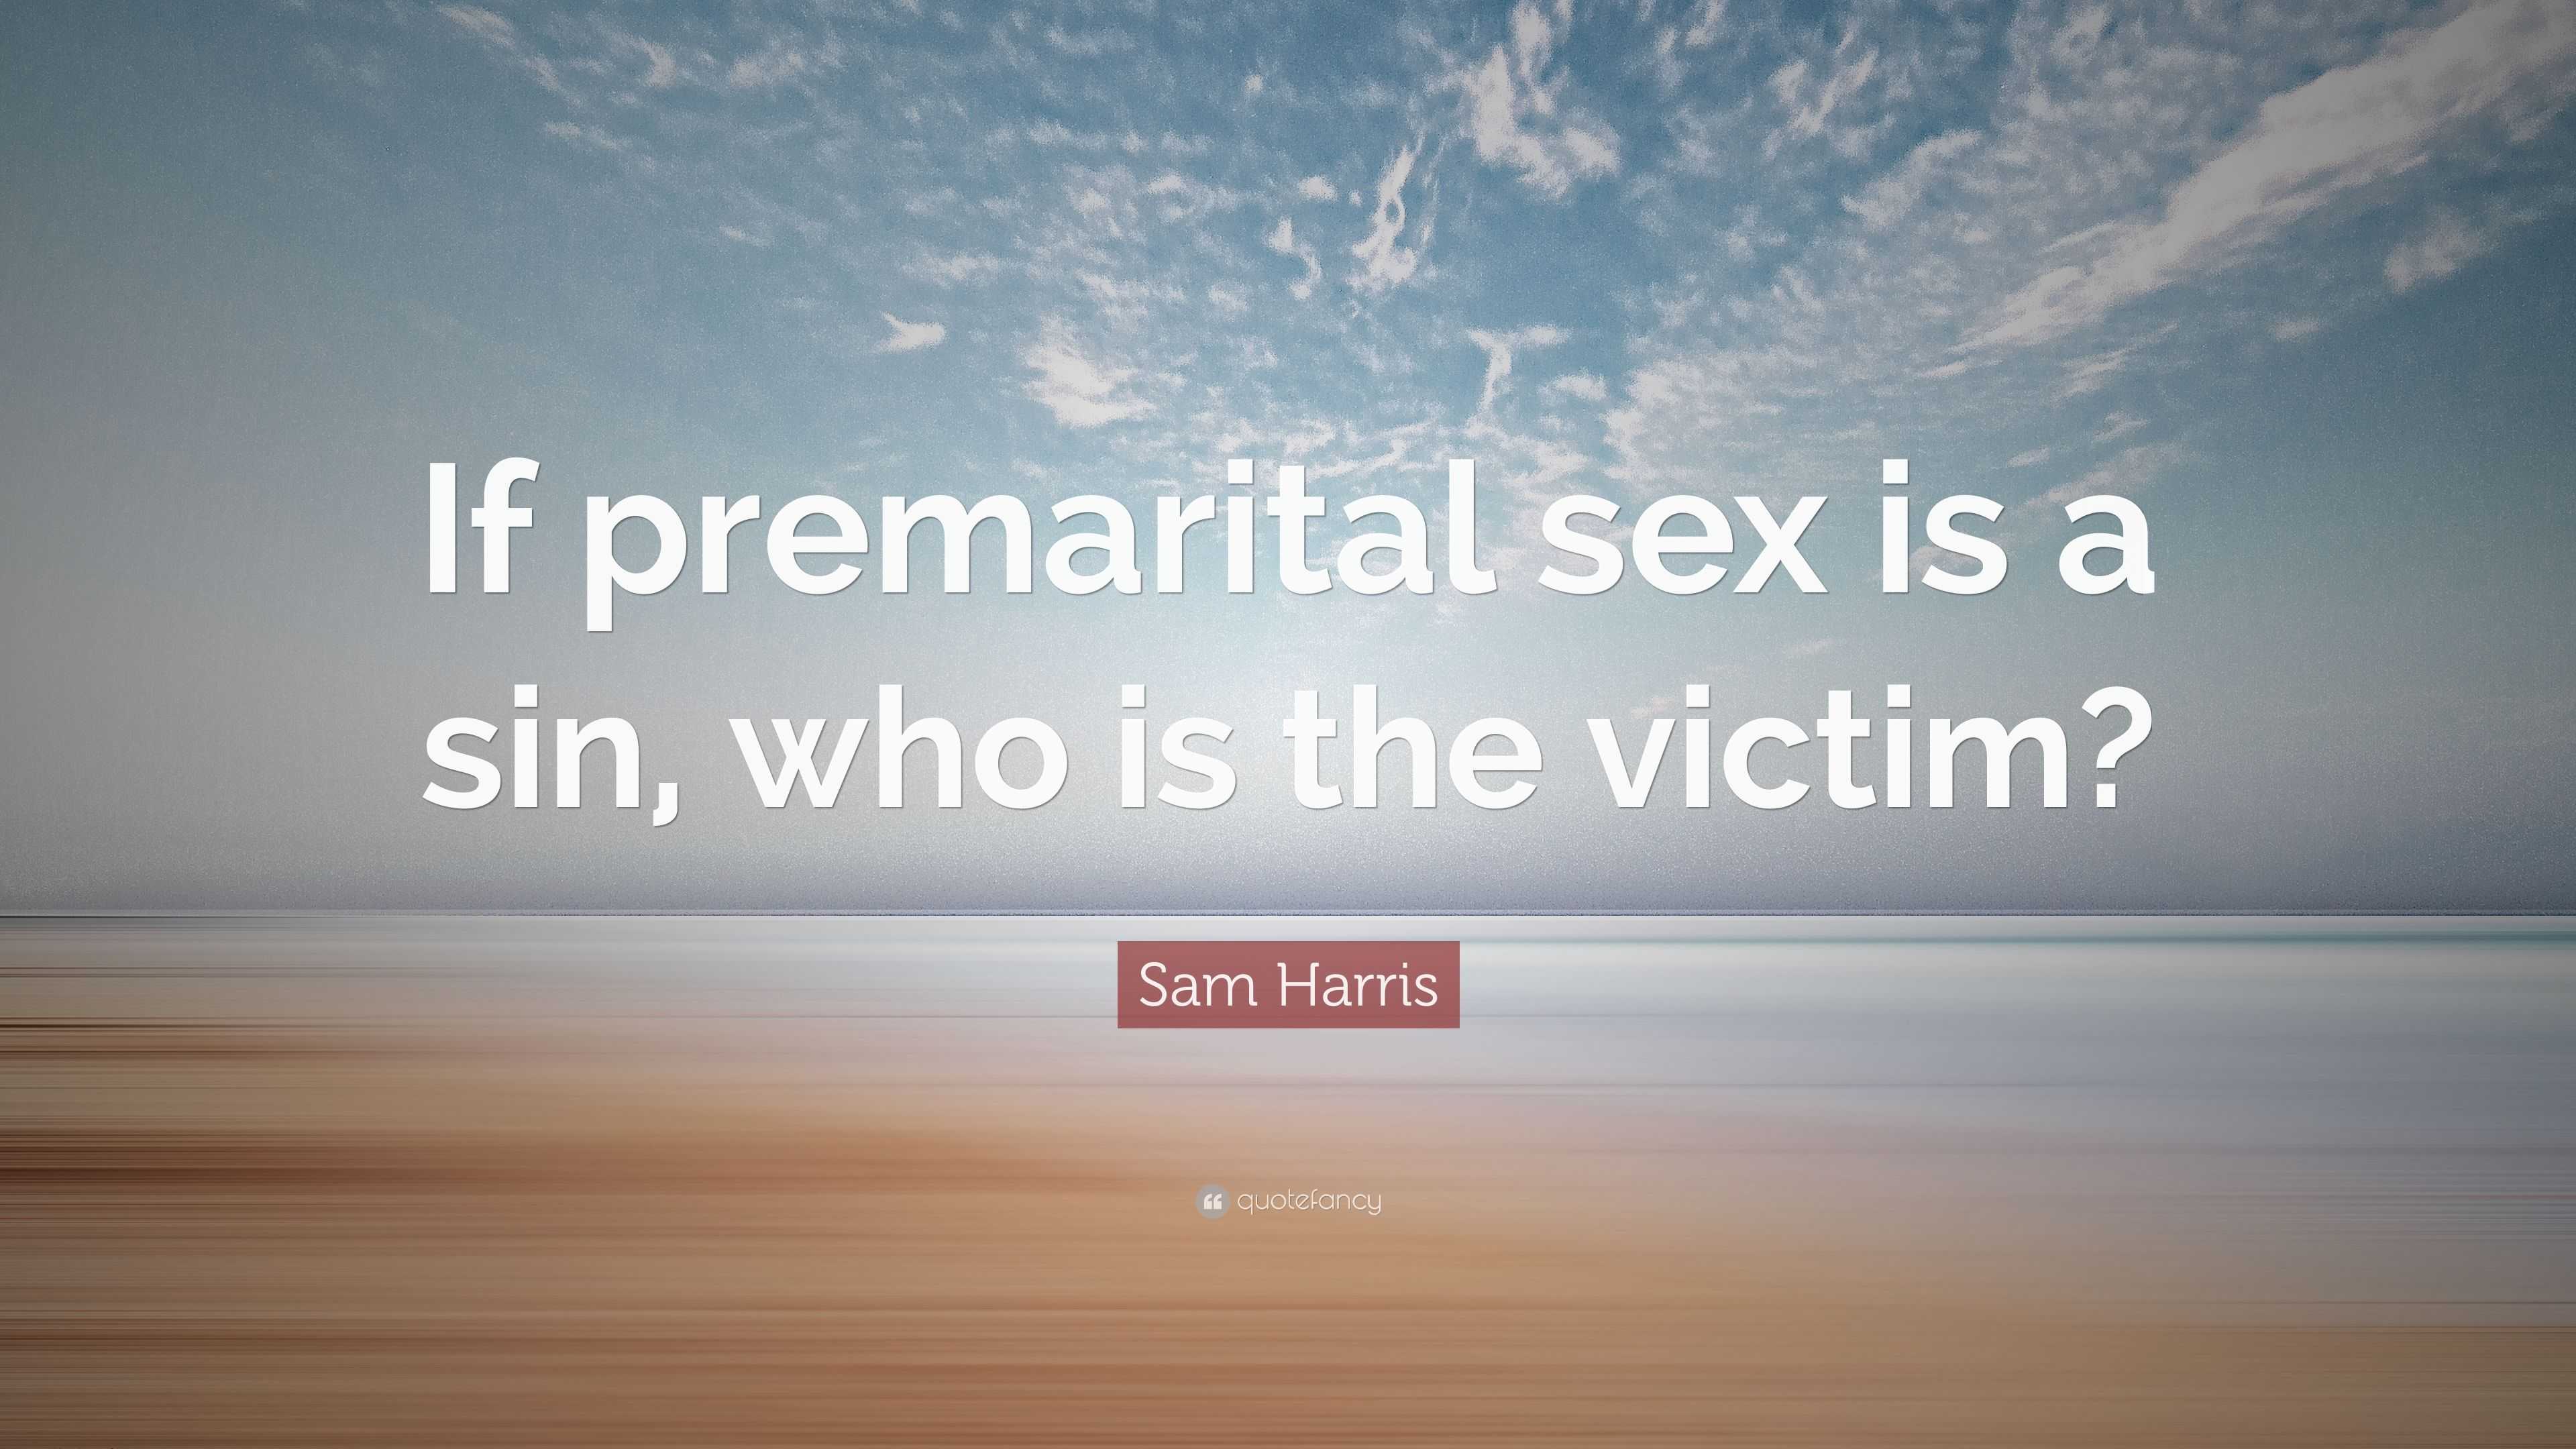 Sam Harris Quote “If premarital sex is a sin, who is the victim?”